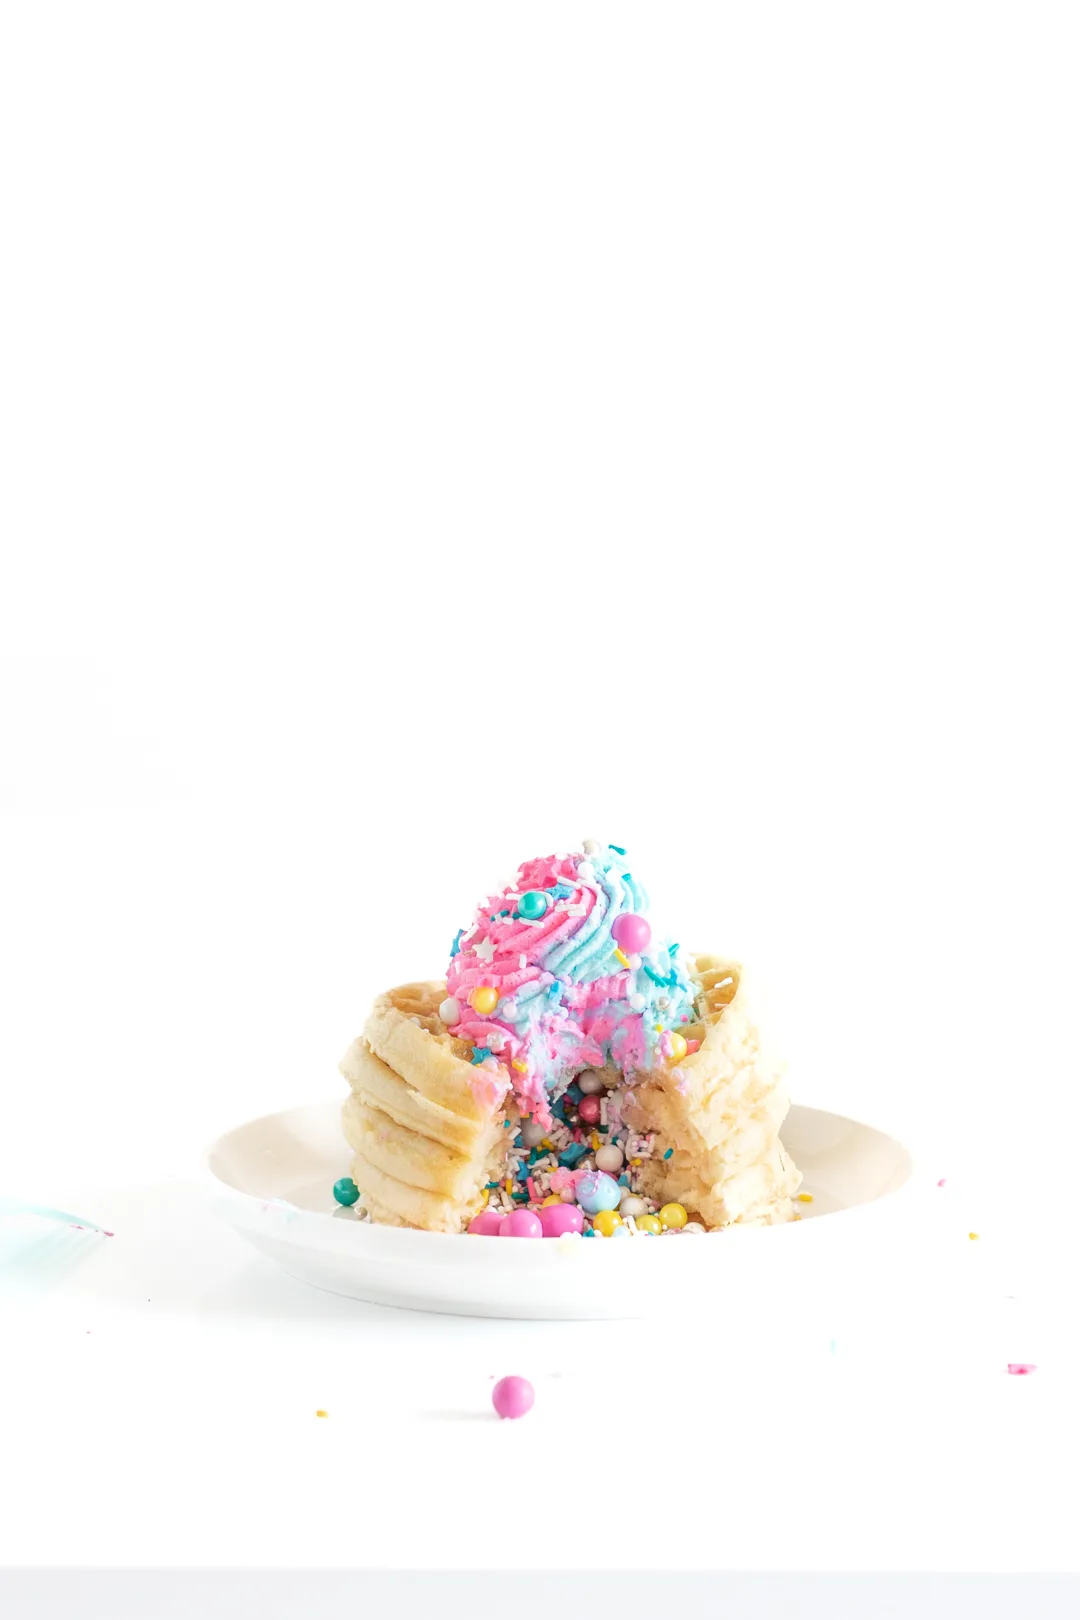 stack of waffles with sprinkles coming out of the center like a piñata 